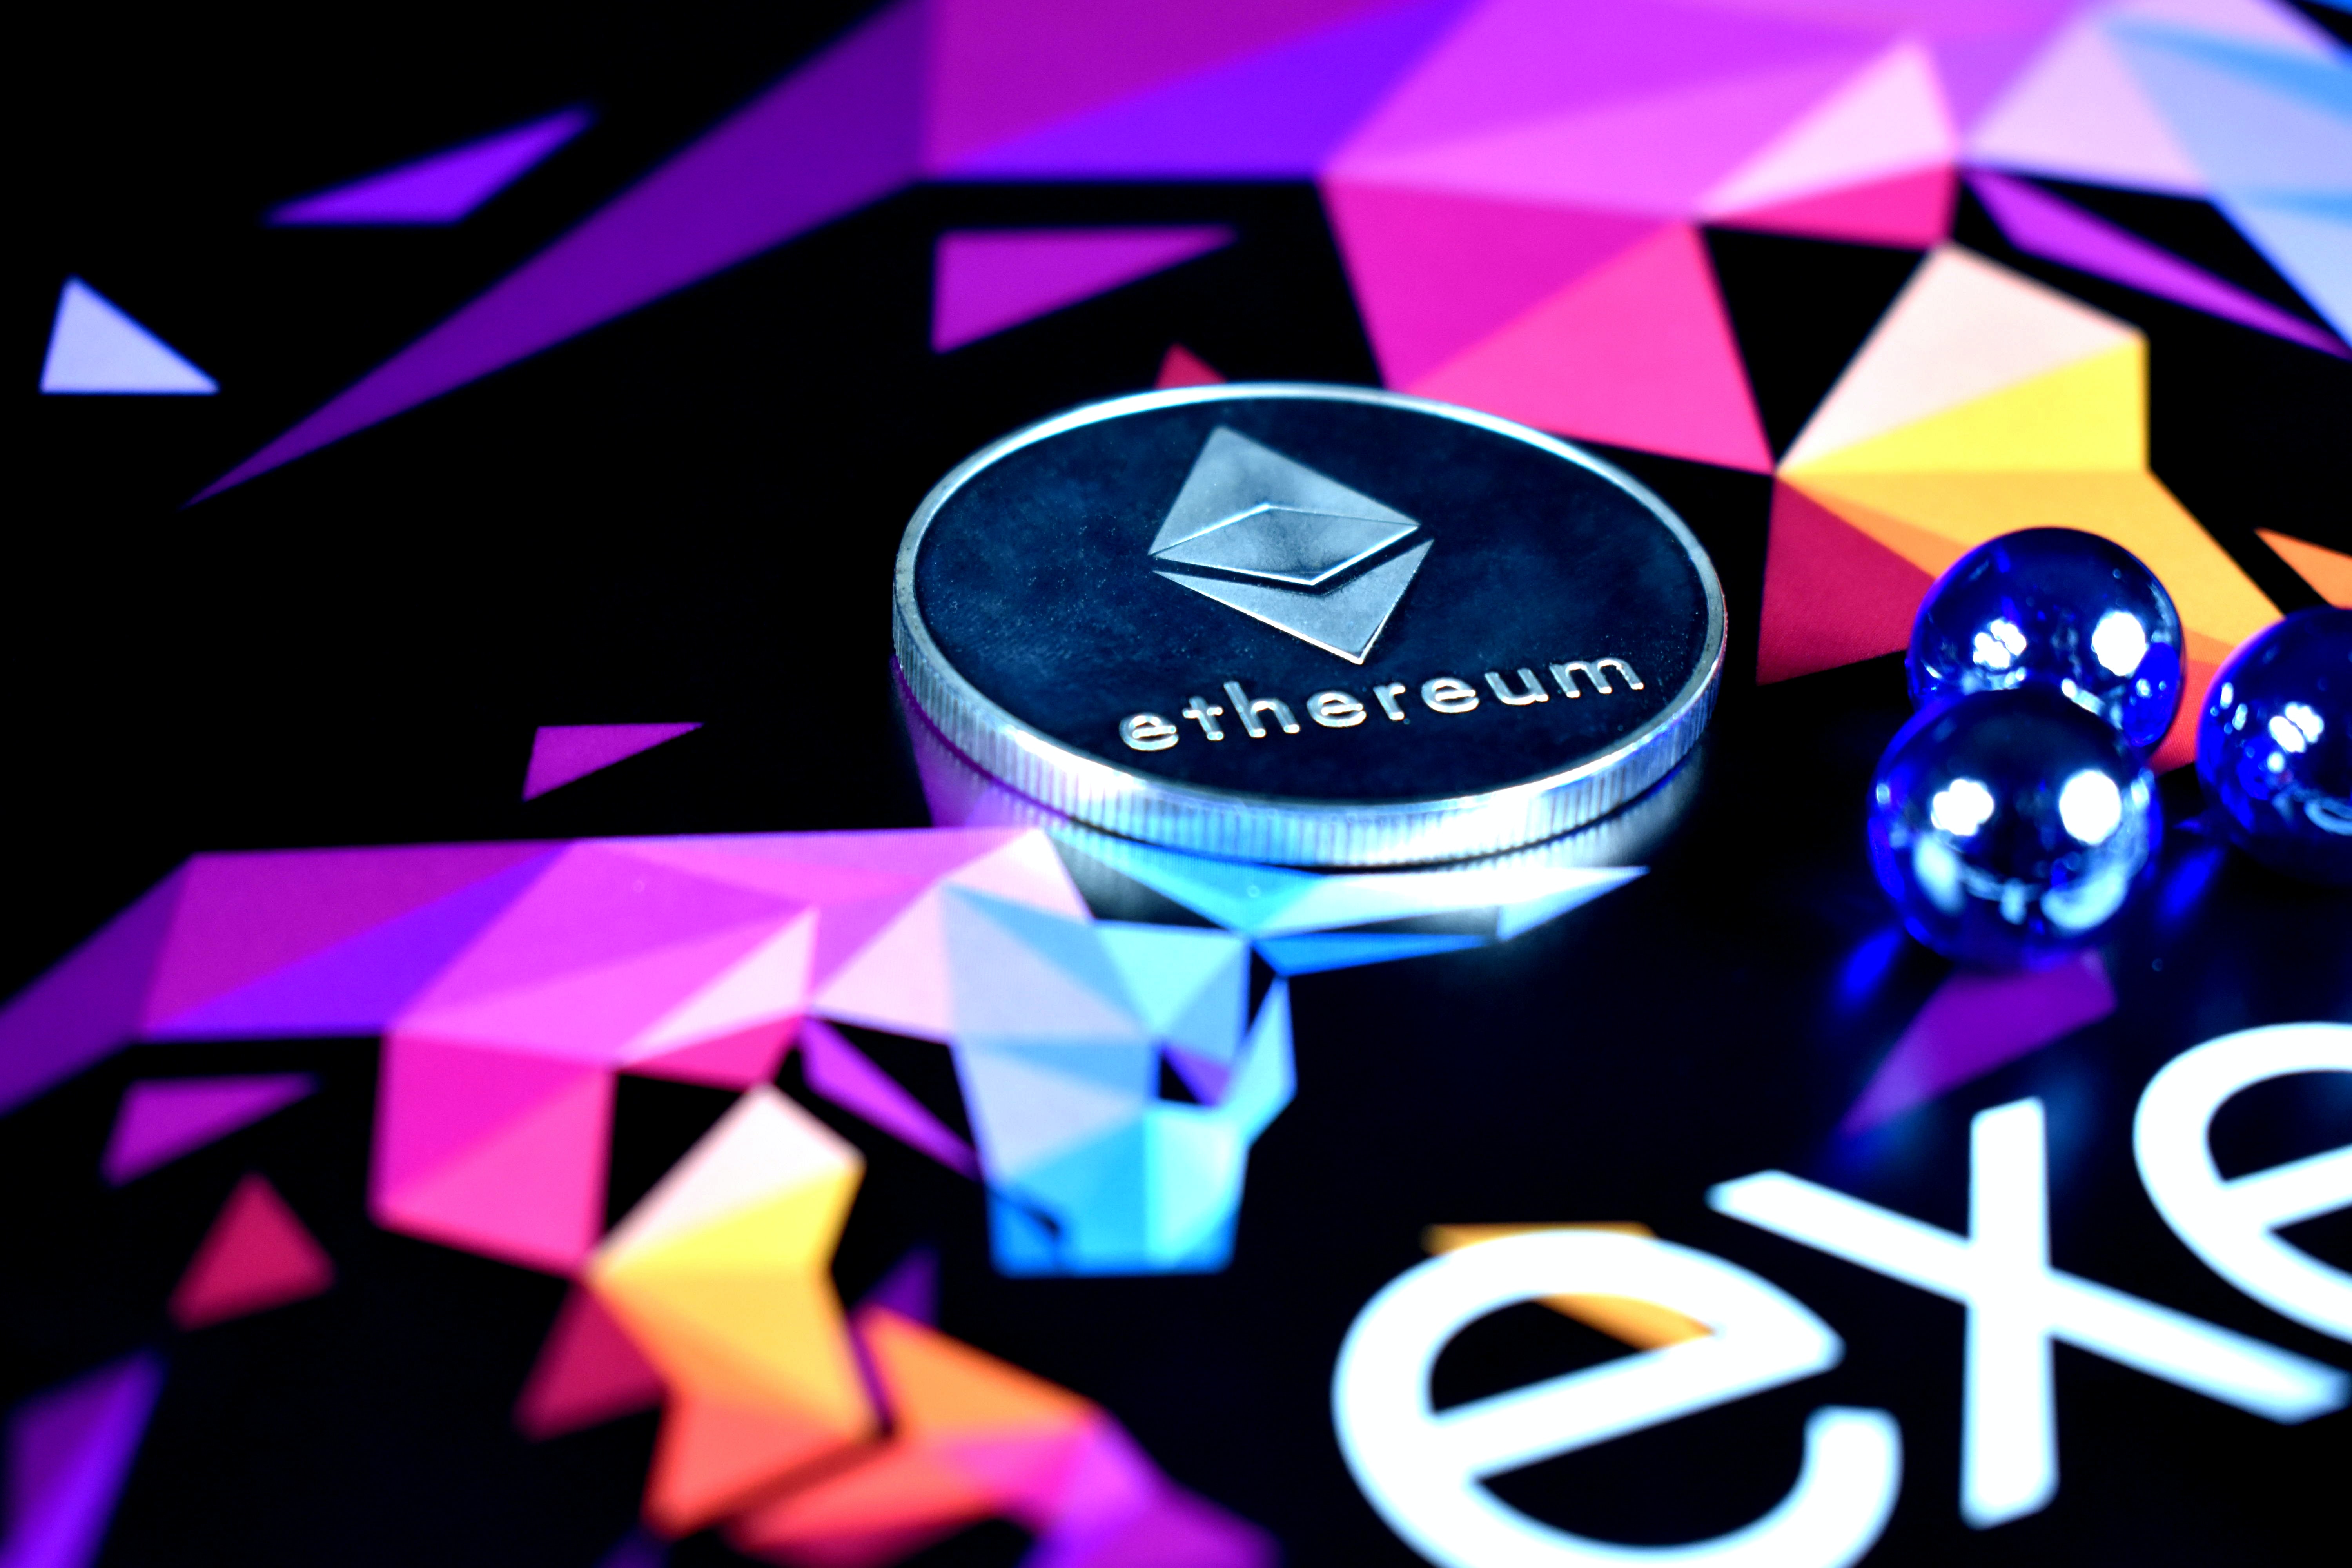 Enough ETH raised to launch Ethereum 2.0